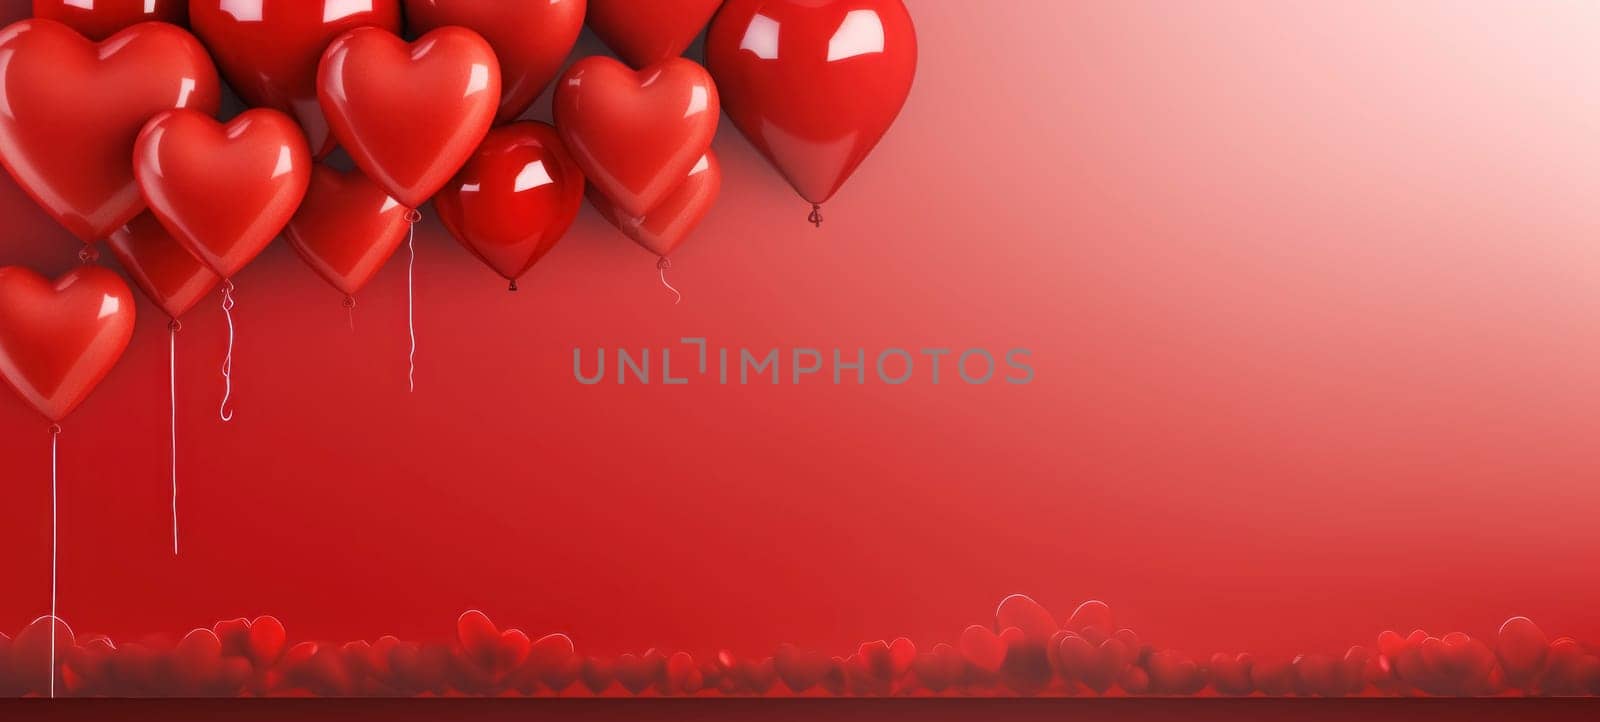 Glossy red heart-shaped balloons on a red gradient backdrop, ideal for Valentine's celebrations